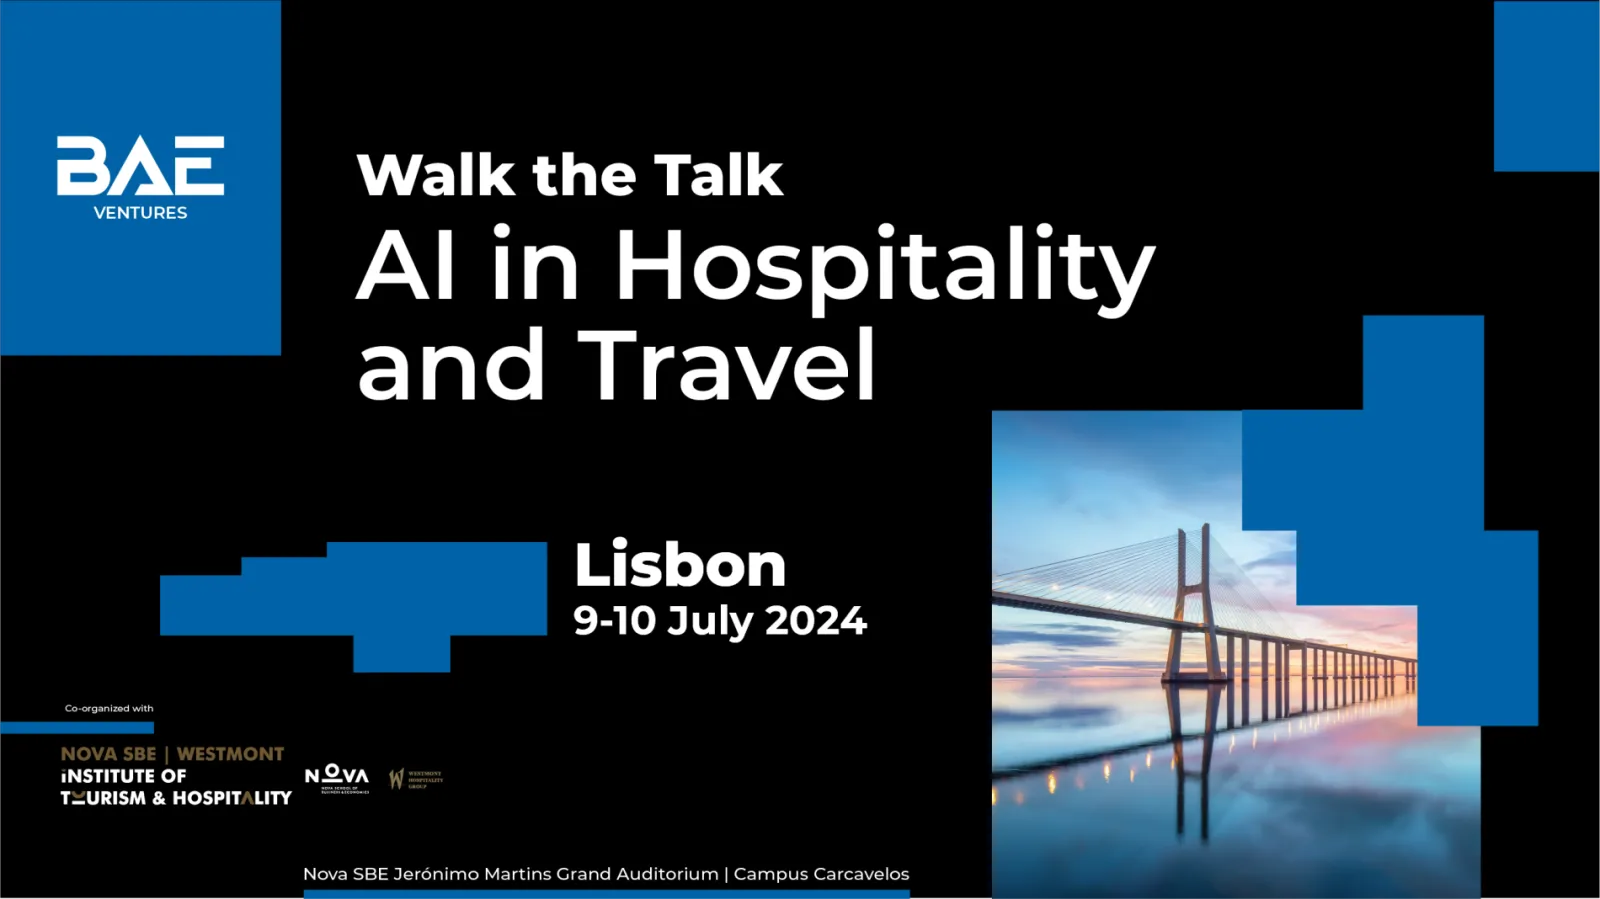 Walk the Talk: AI in Hospitality and Travel